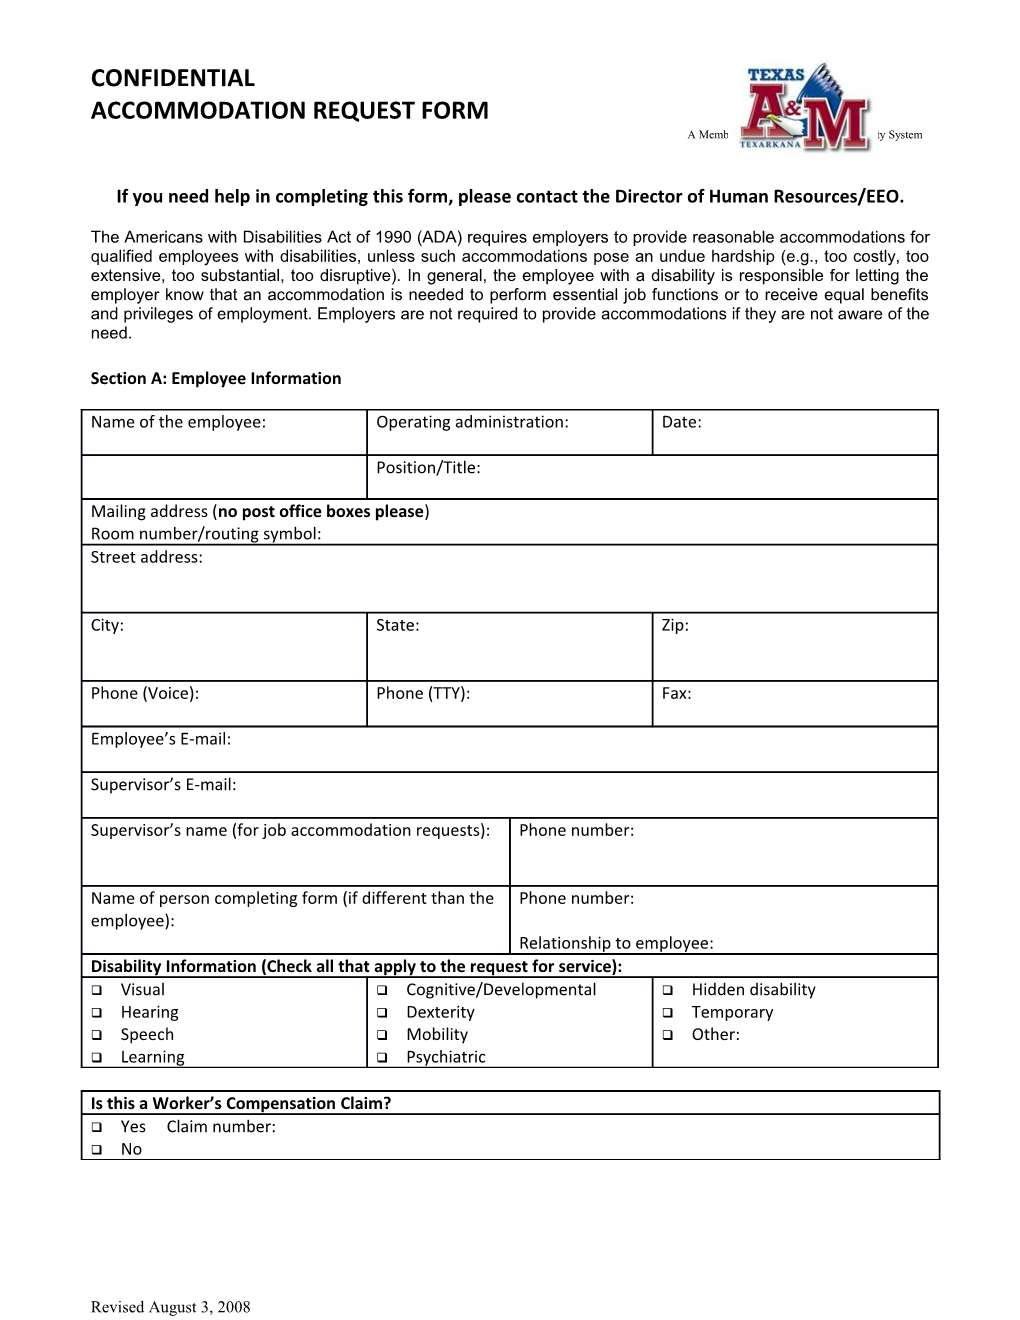 If You Need Help in Completing This Form, Please Contact the Director of Human Resources/EEO